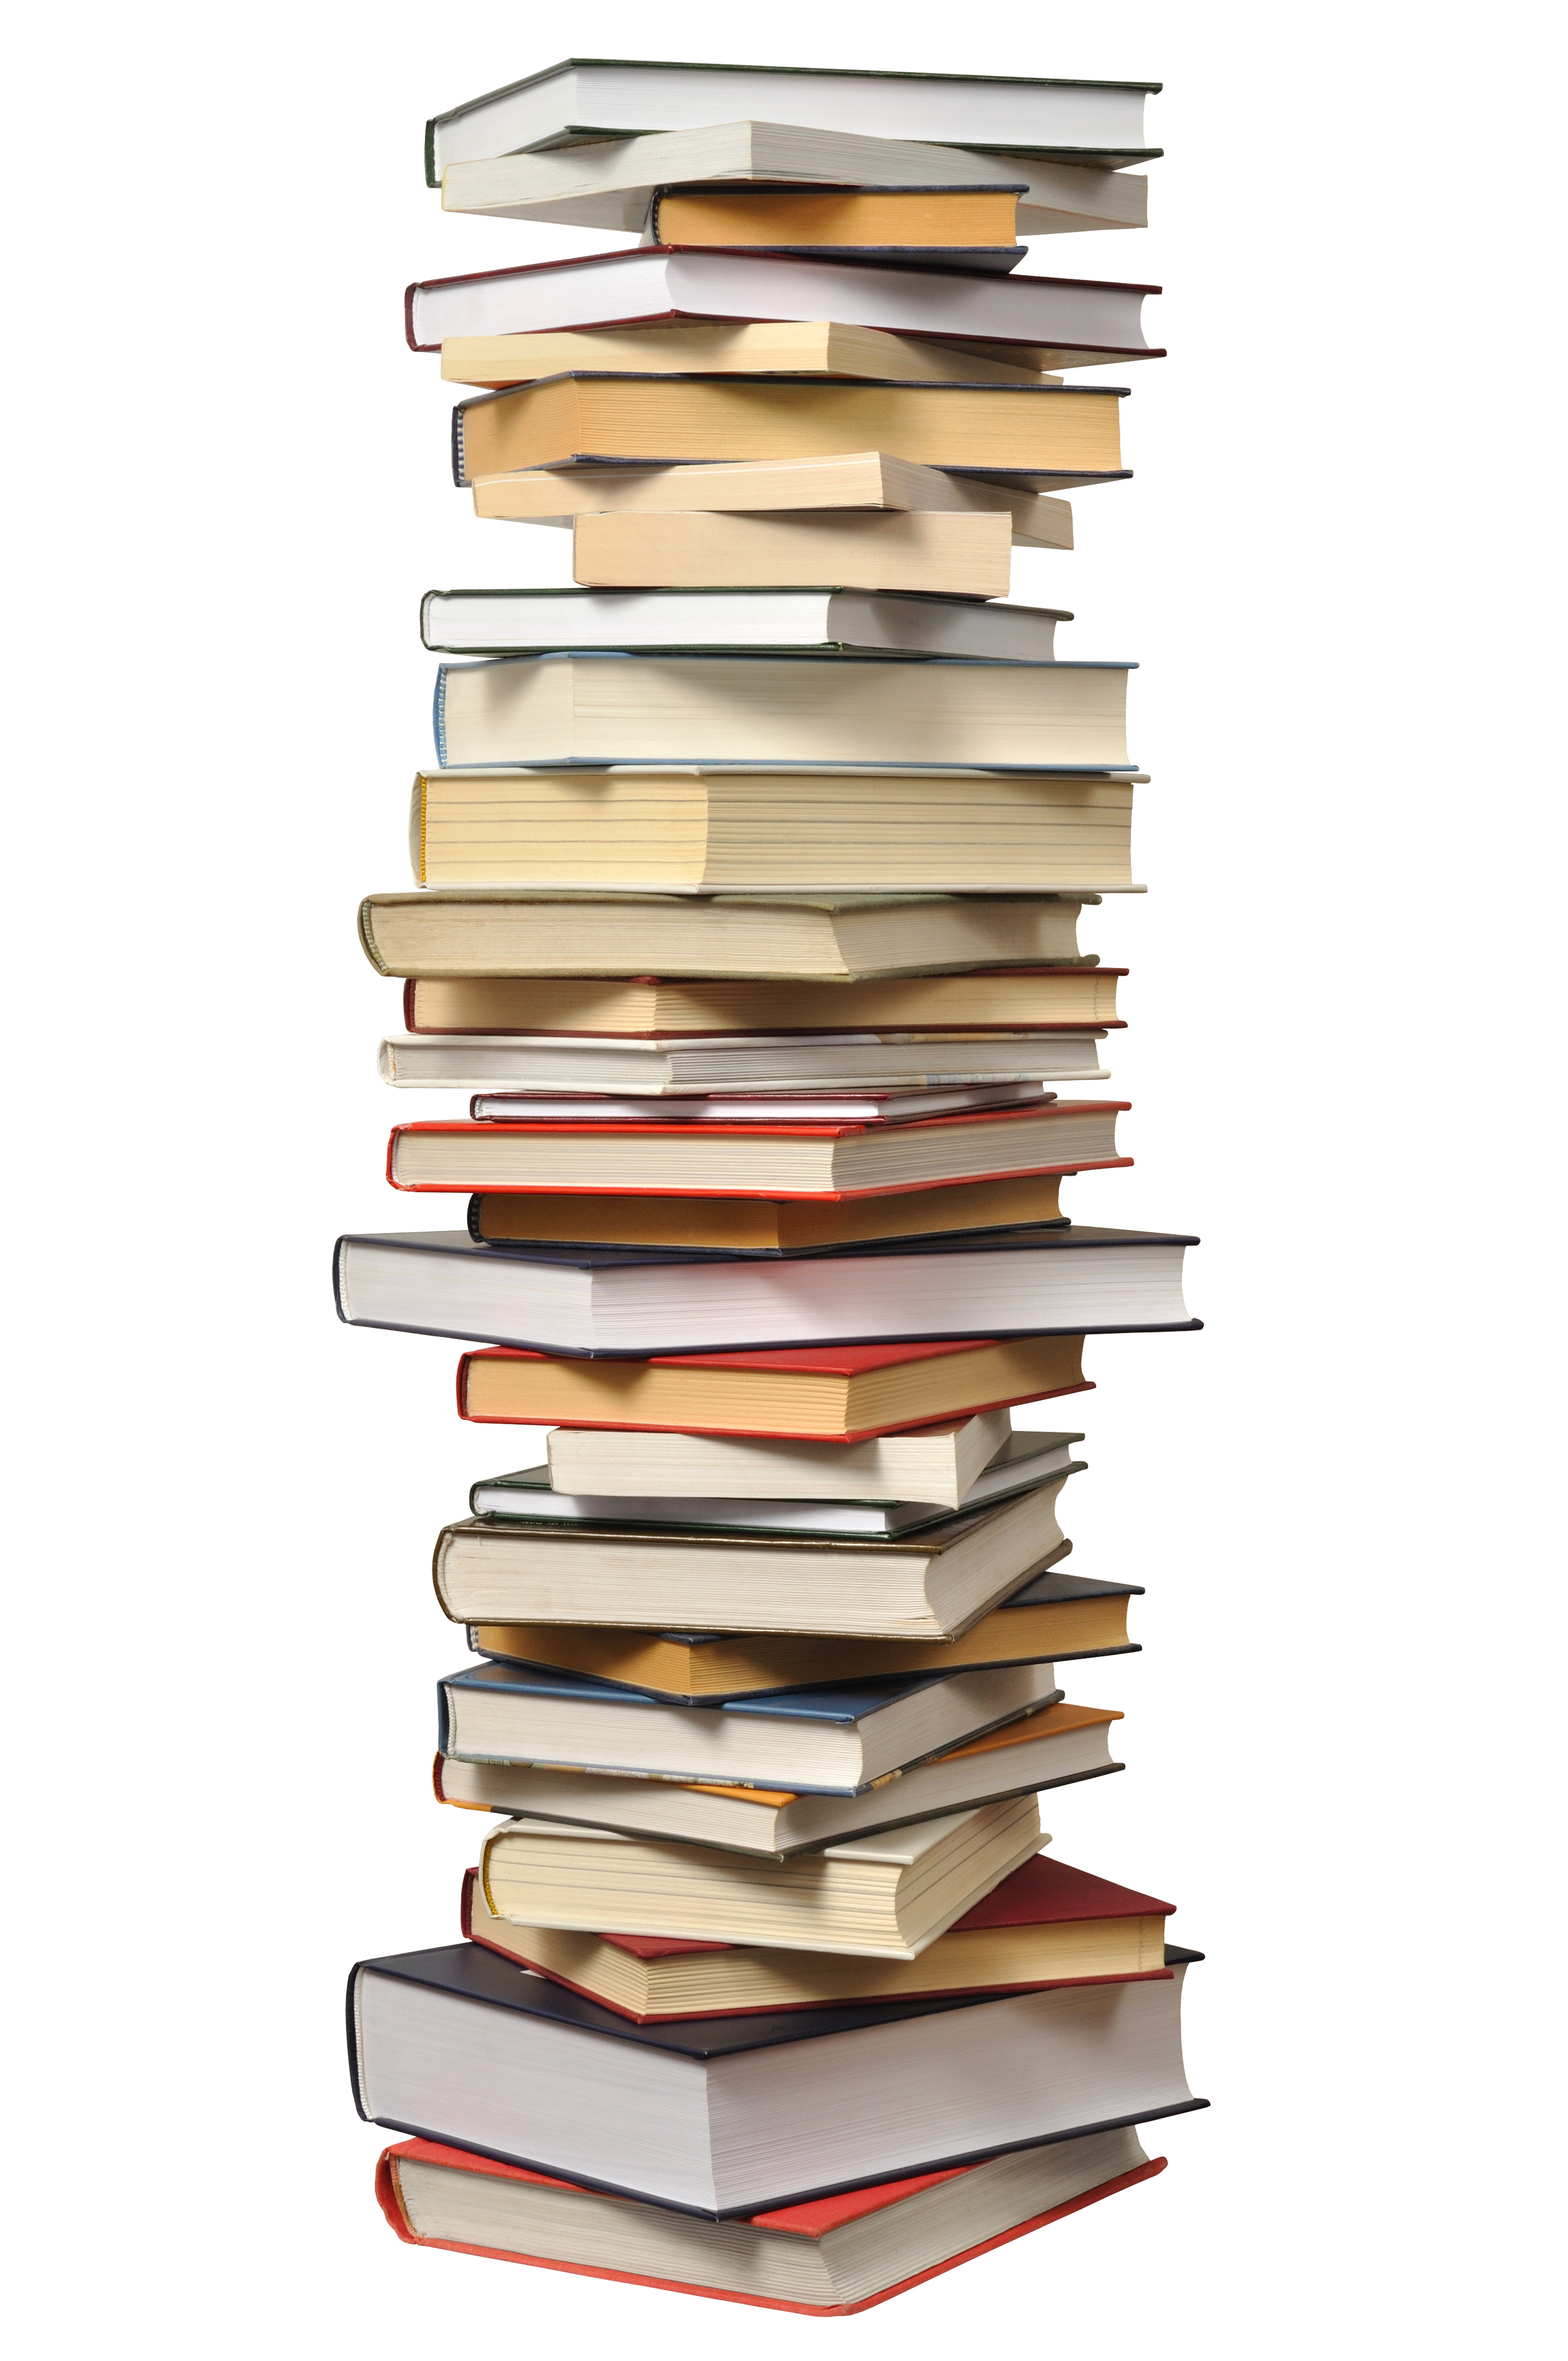 Image of a Tall Stack of Books